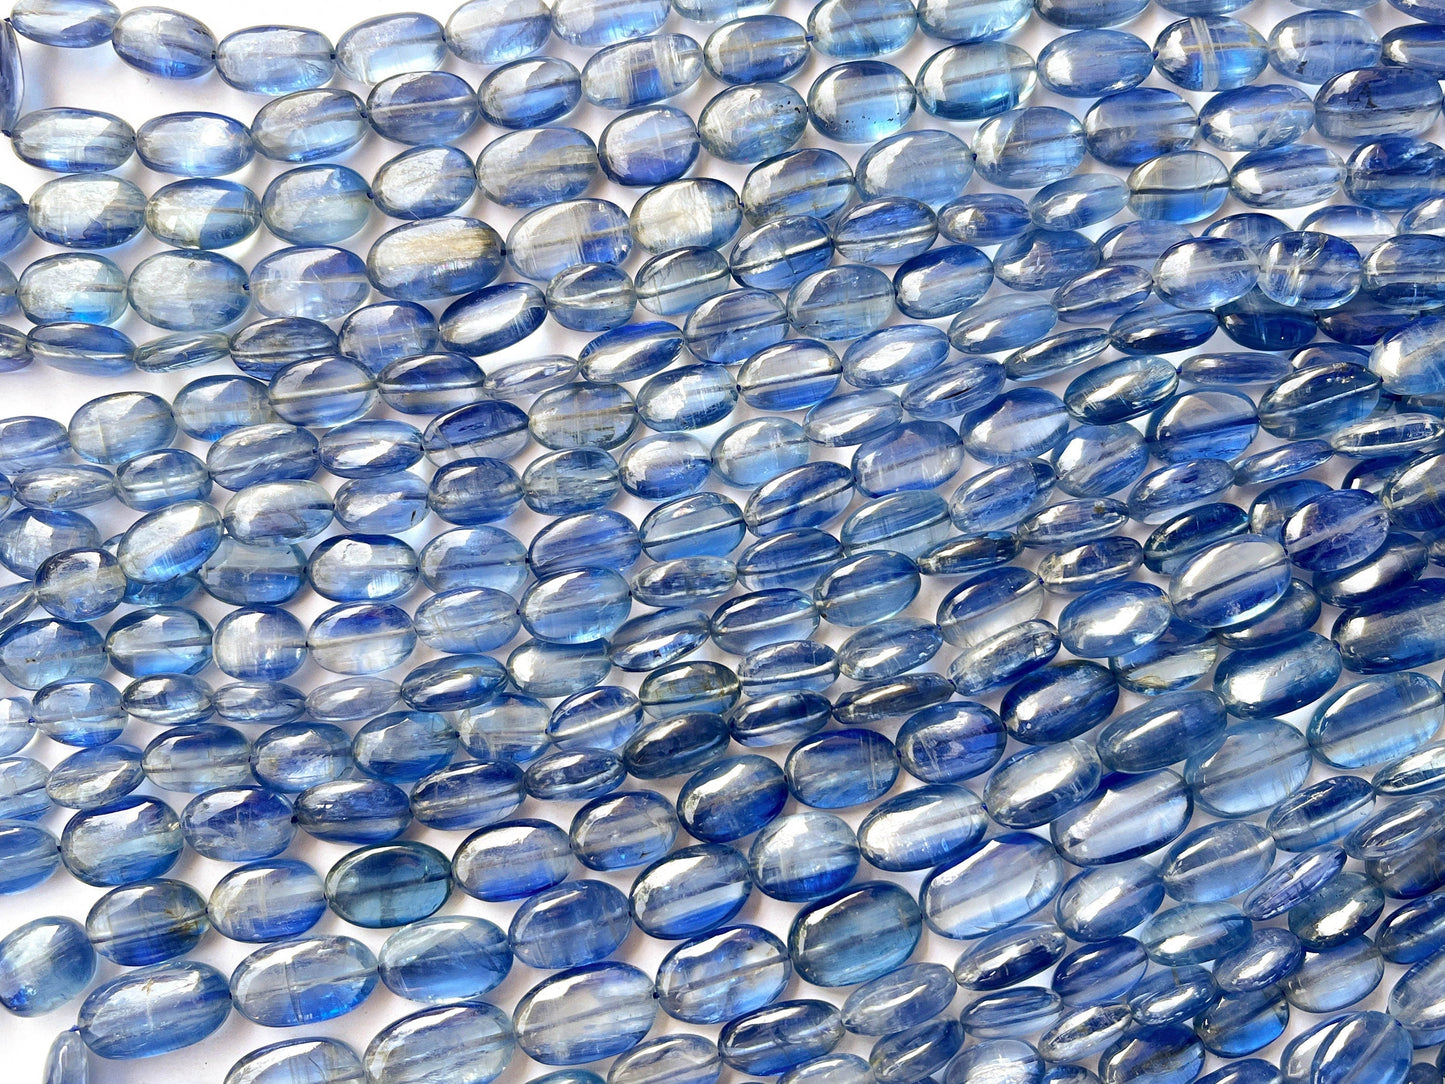 16 Inch Natural AAA Blue Kyanite Oval Shape Smooth Beads, 7x10mm to 7x12mm Beadsforyourjewelry